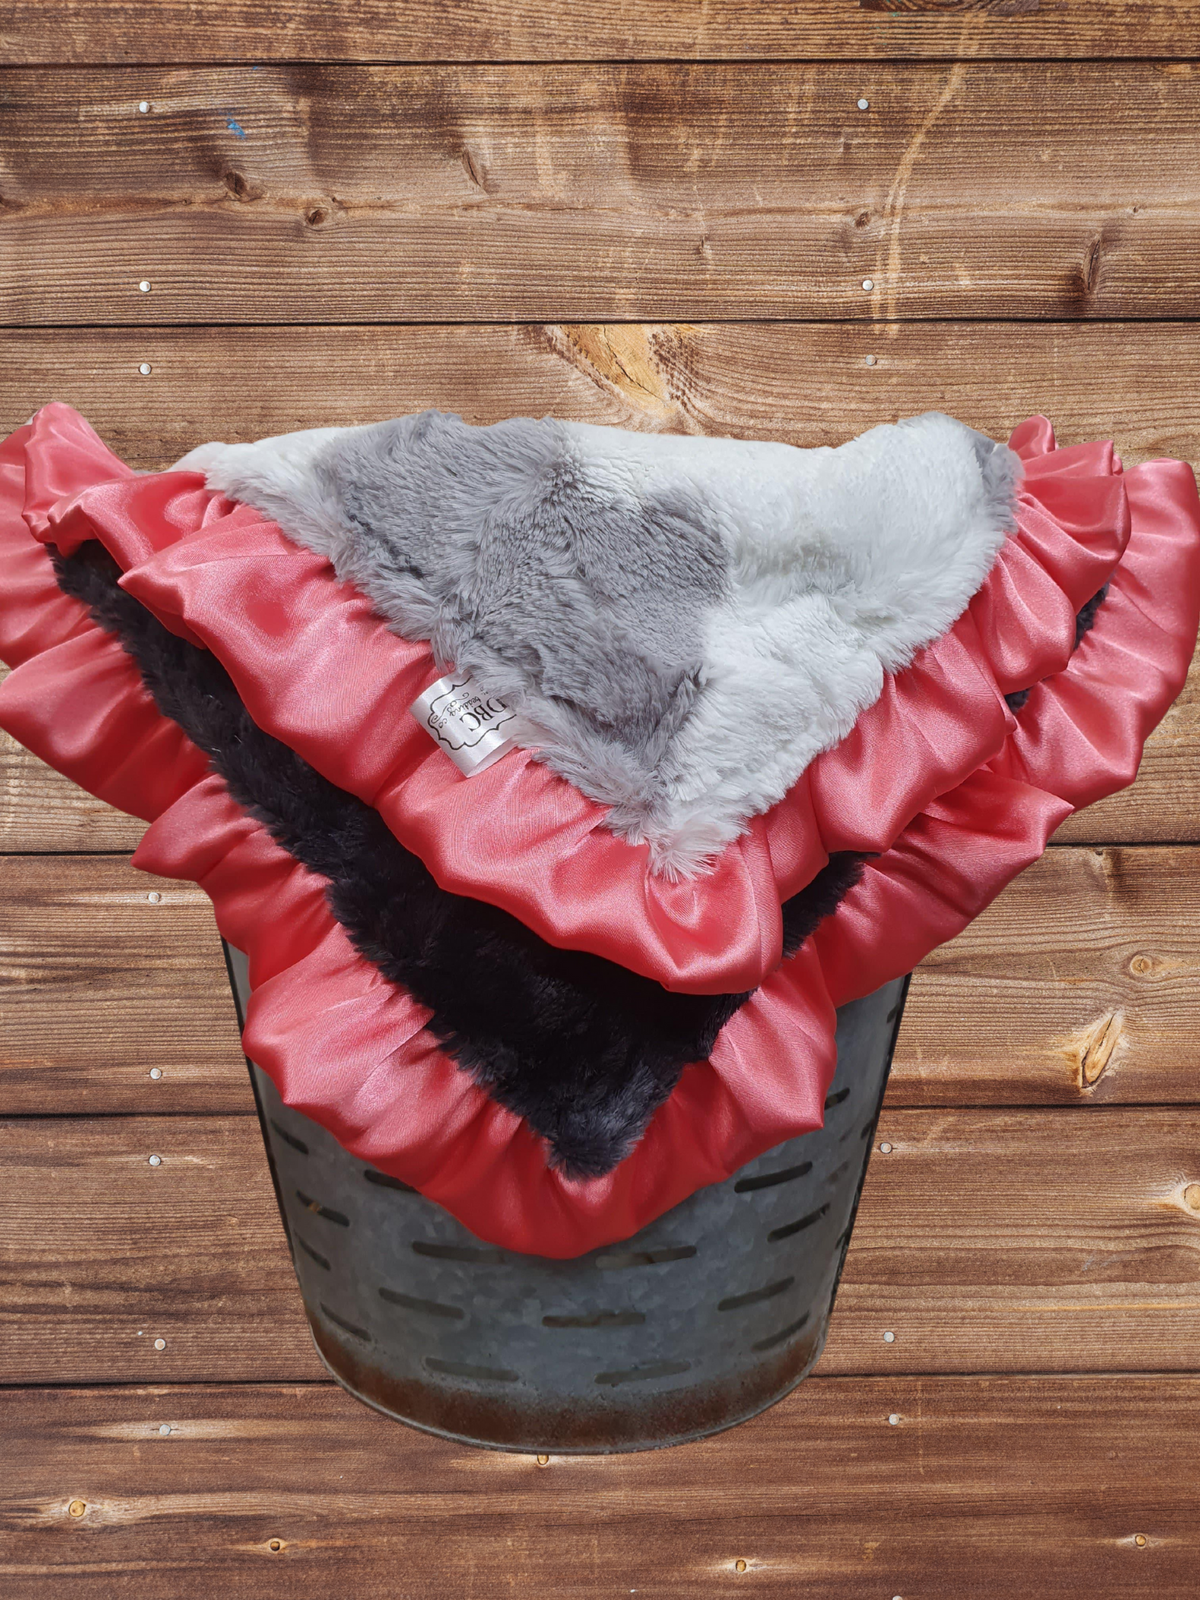 Ruffle Baby Lovey - Gray Calf Minky with Coral Satin Ruffle Western Lovey - DBC Baby Bedding Co 